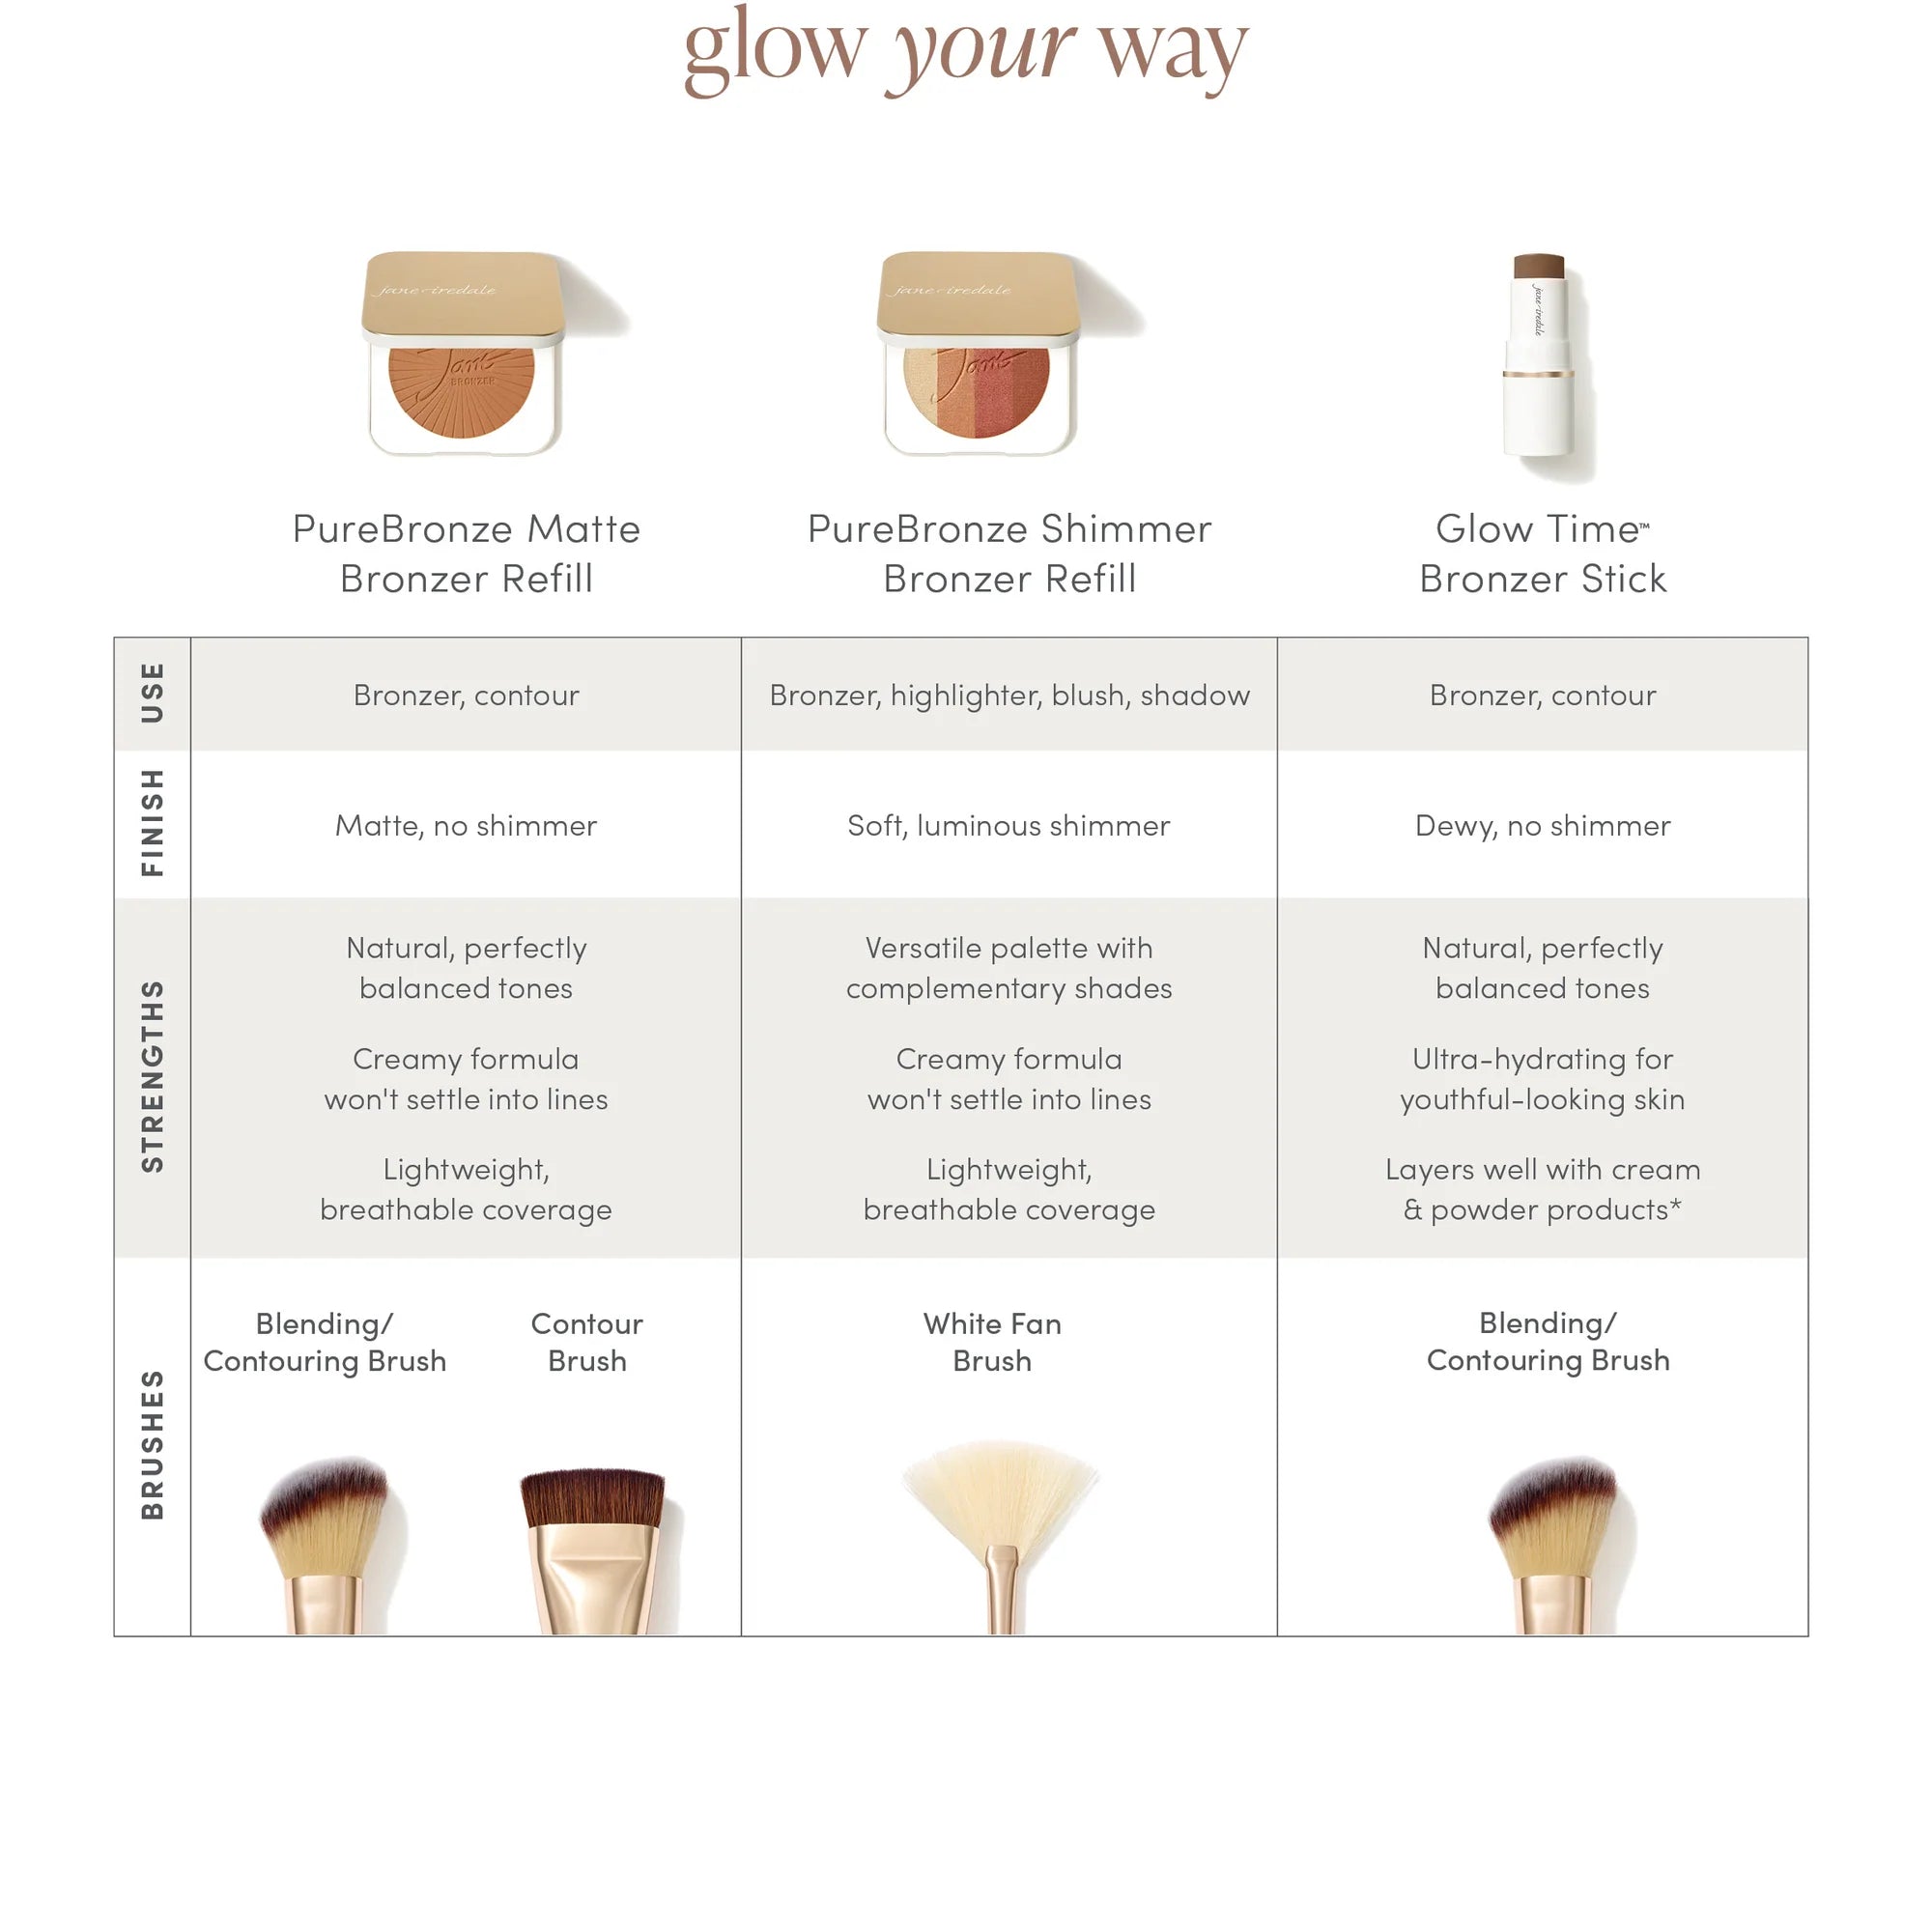 Jane Iredale's glow your way chart for different type of bronzer - PureBronze Matte, Shimmer and Glow Time Bronzer Stick